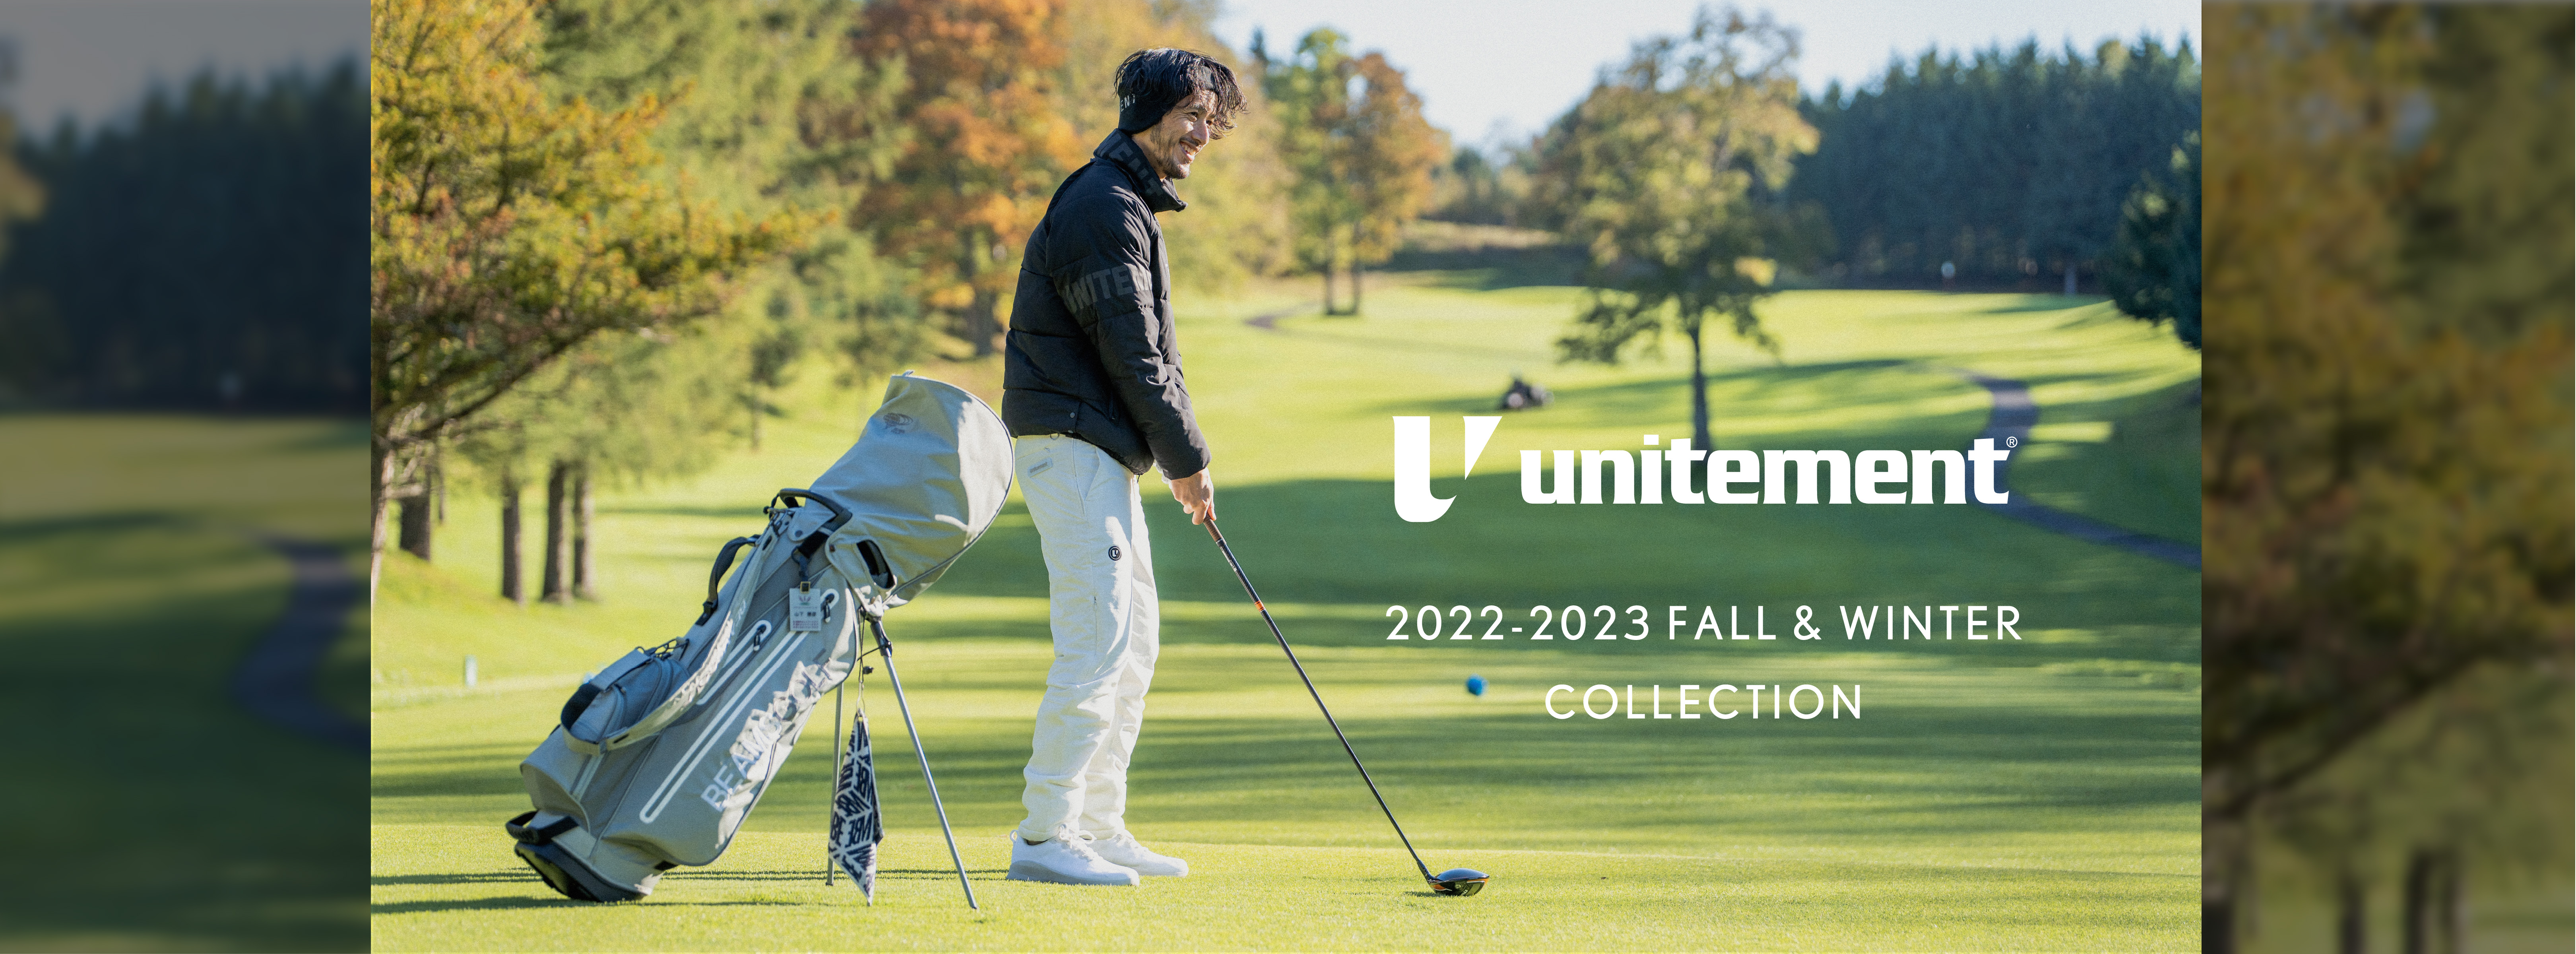 unitement 2022-2023 FALL / WINTER COLLECTION